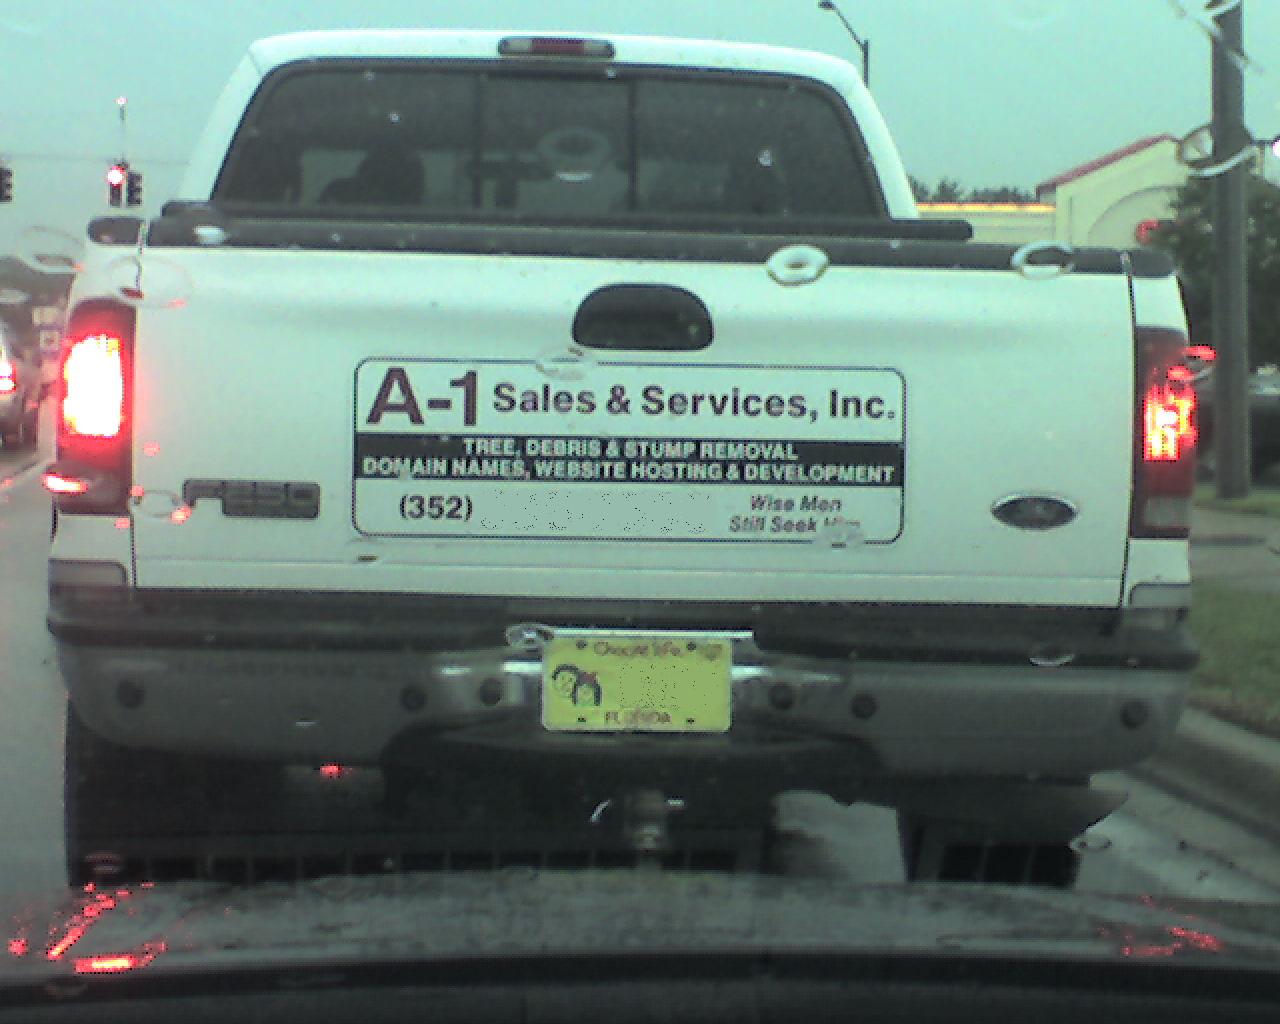 magnet sign on truck: 